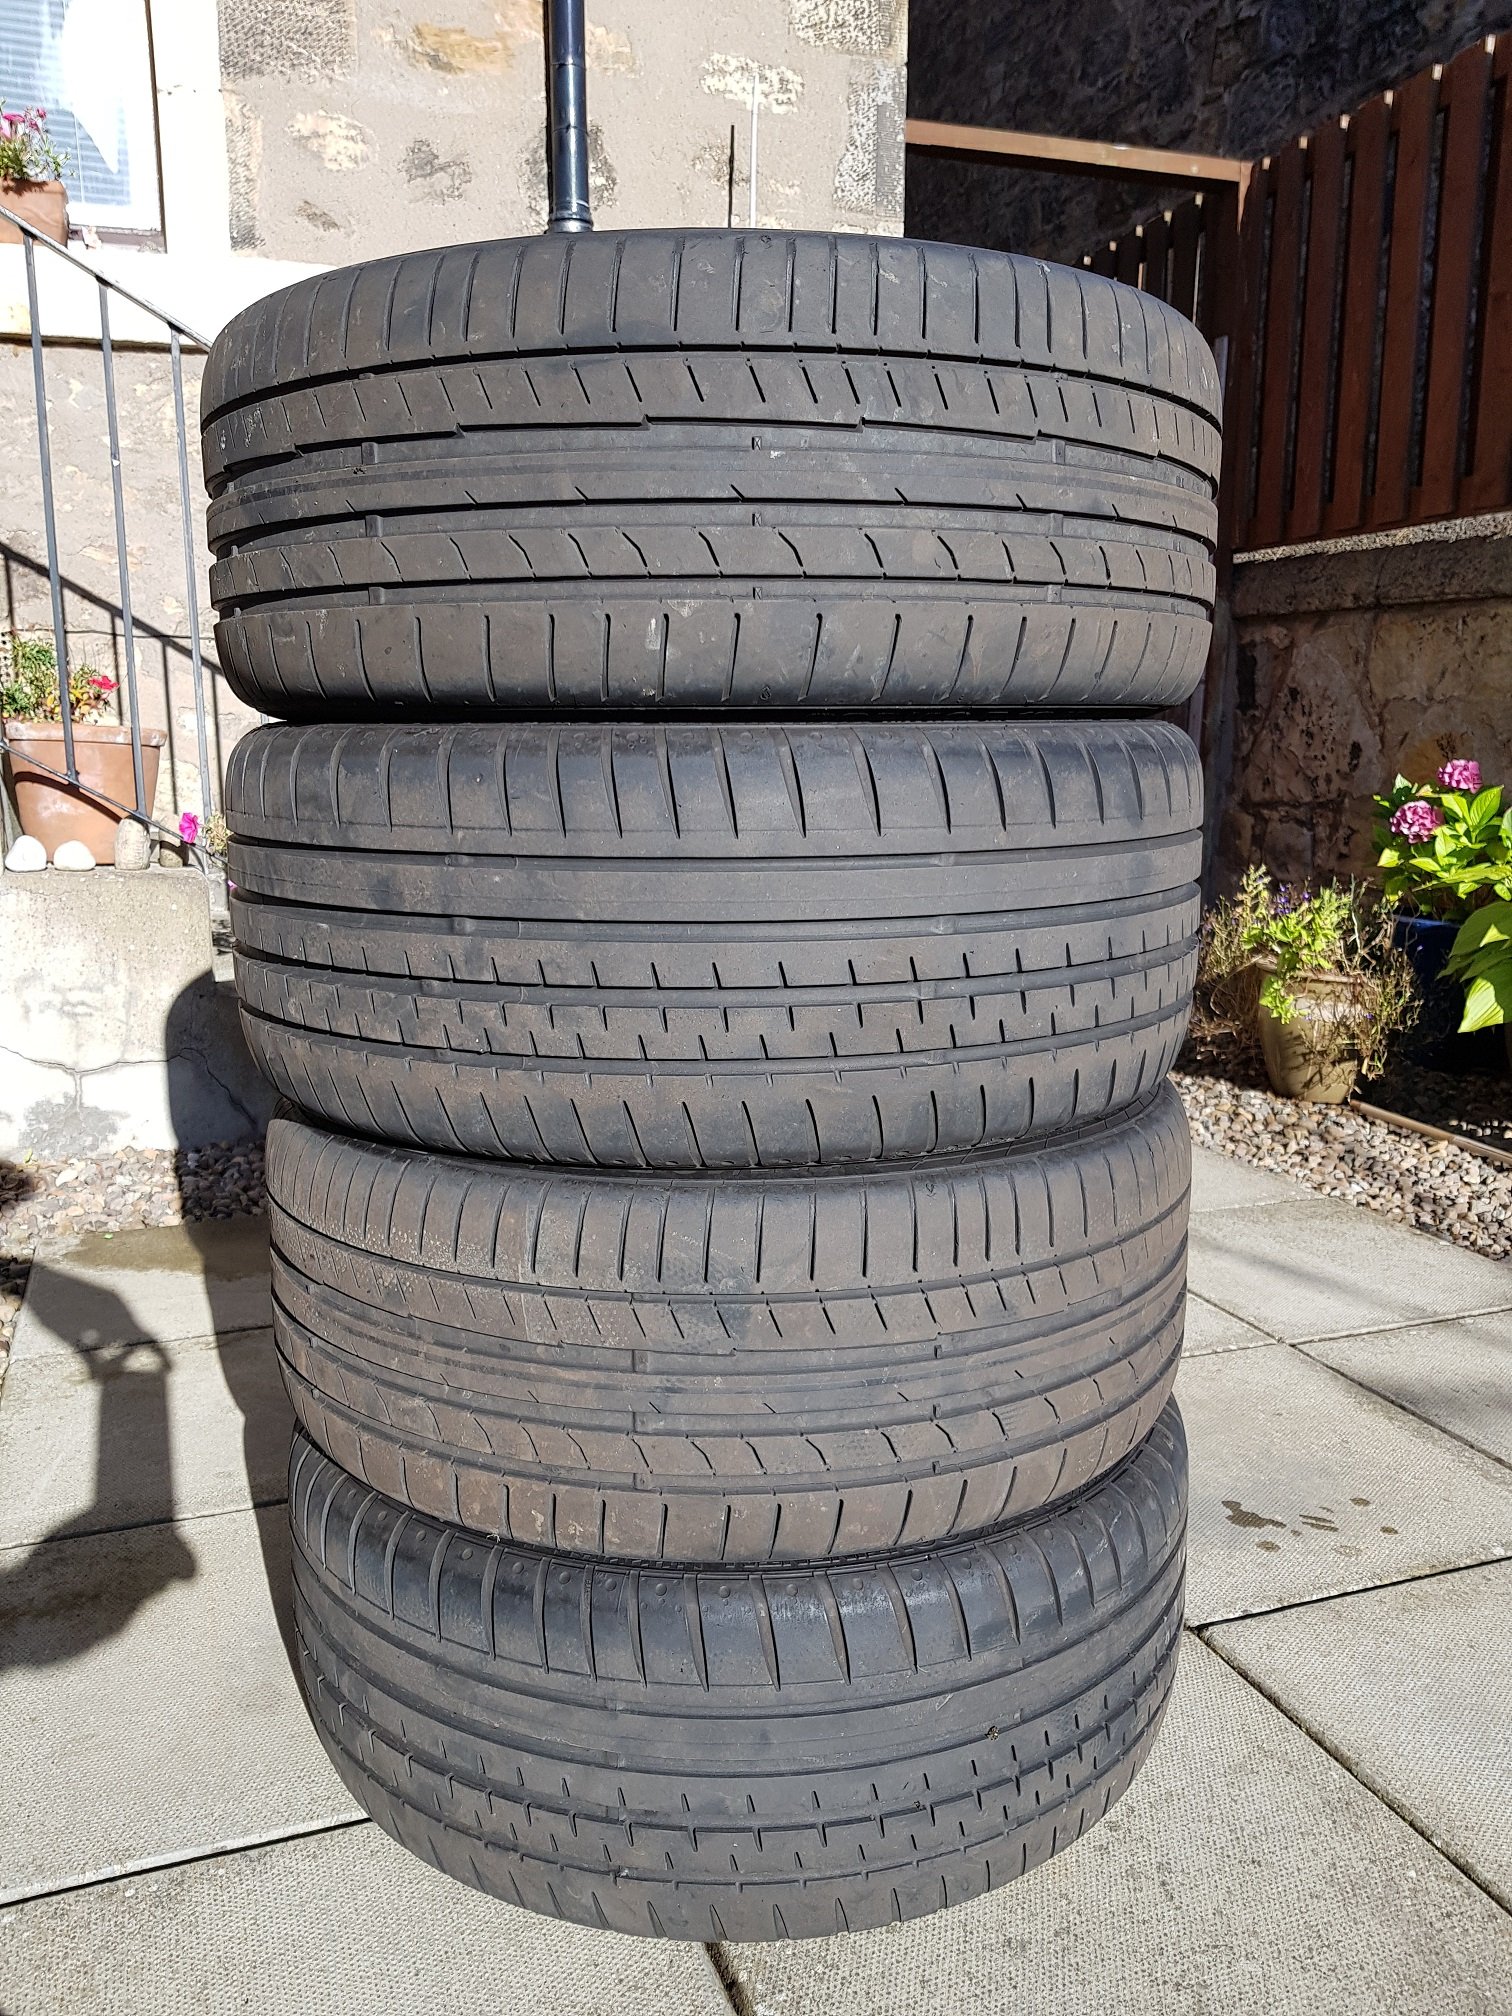 SOLD***VRS 18” Anthracite Grey Gemini Alloy Wheels for Sale - Wheels ...